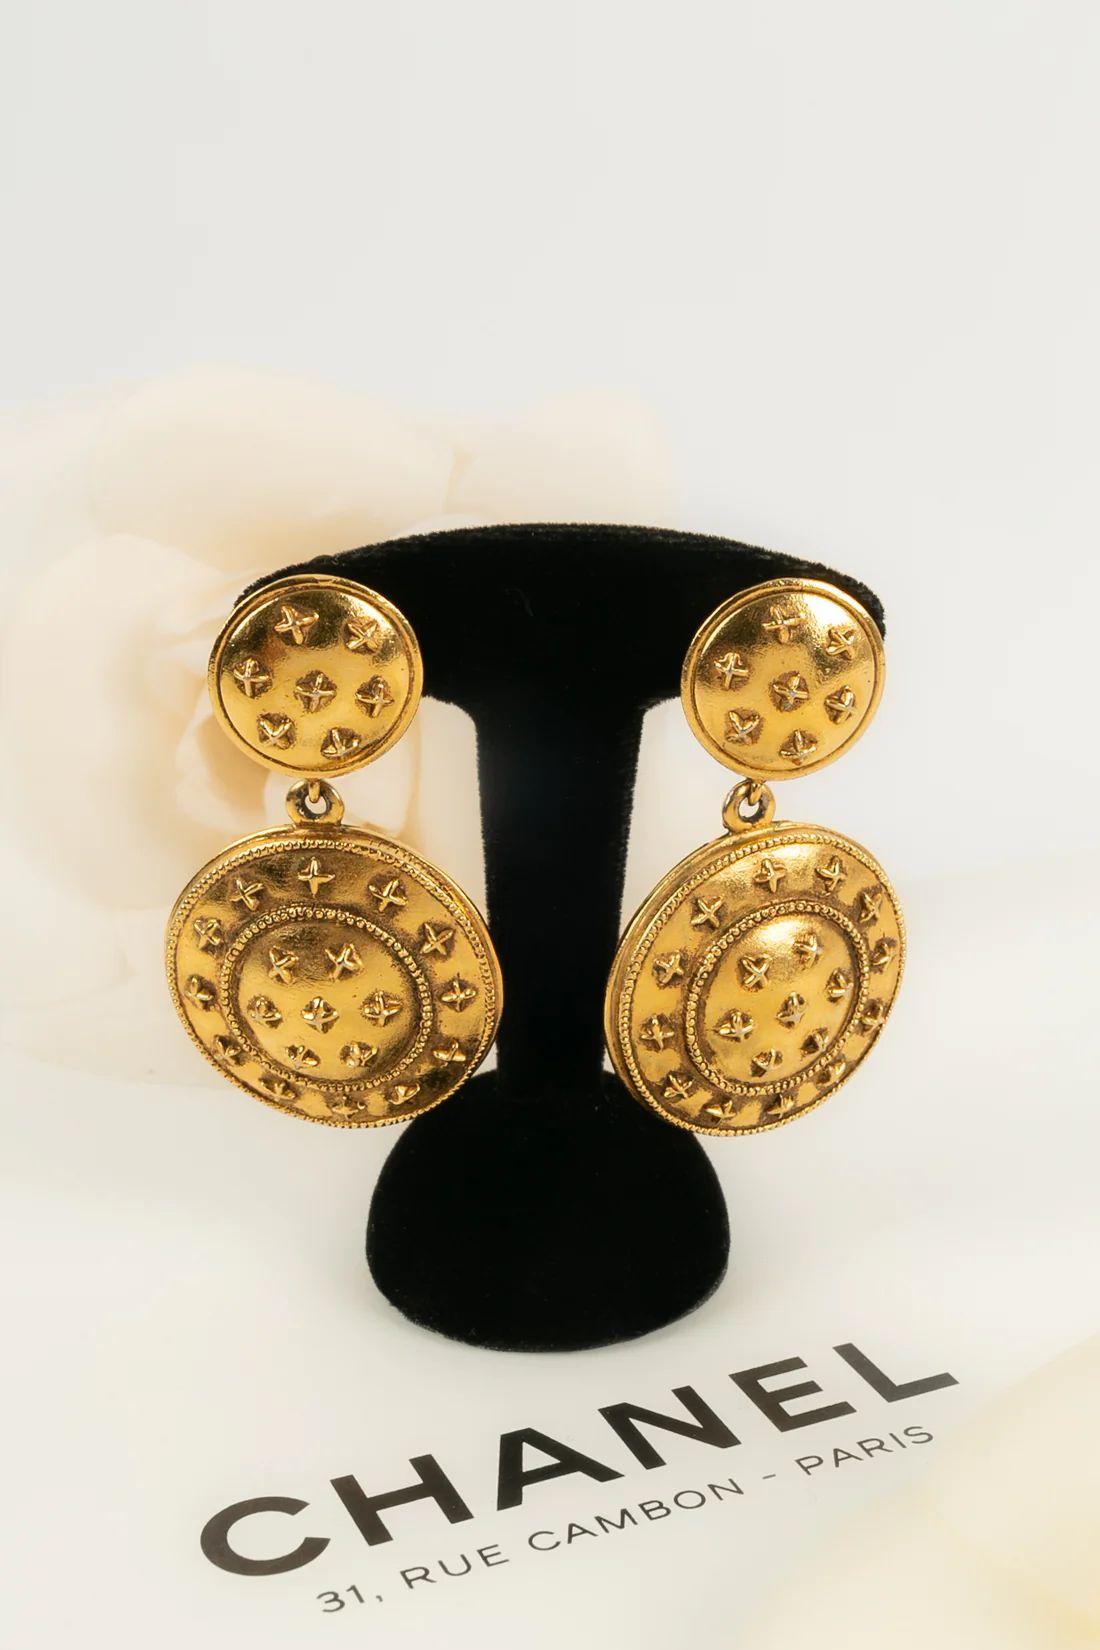 Chanel - (Made in France) Gold metal clip earrings dating from the 1980s.

Additional information:
Dimensions: 6 L cm

Condition: 
Very good condition

Seller Ref number: BOB90